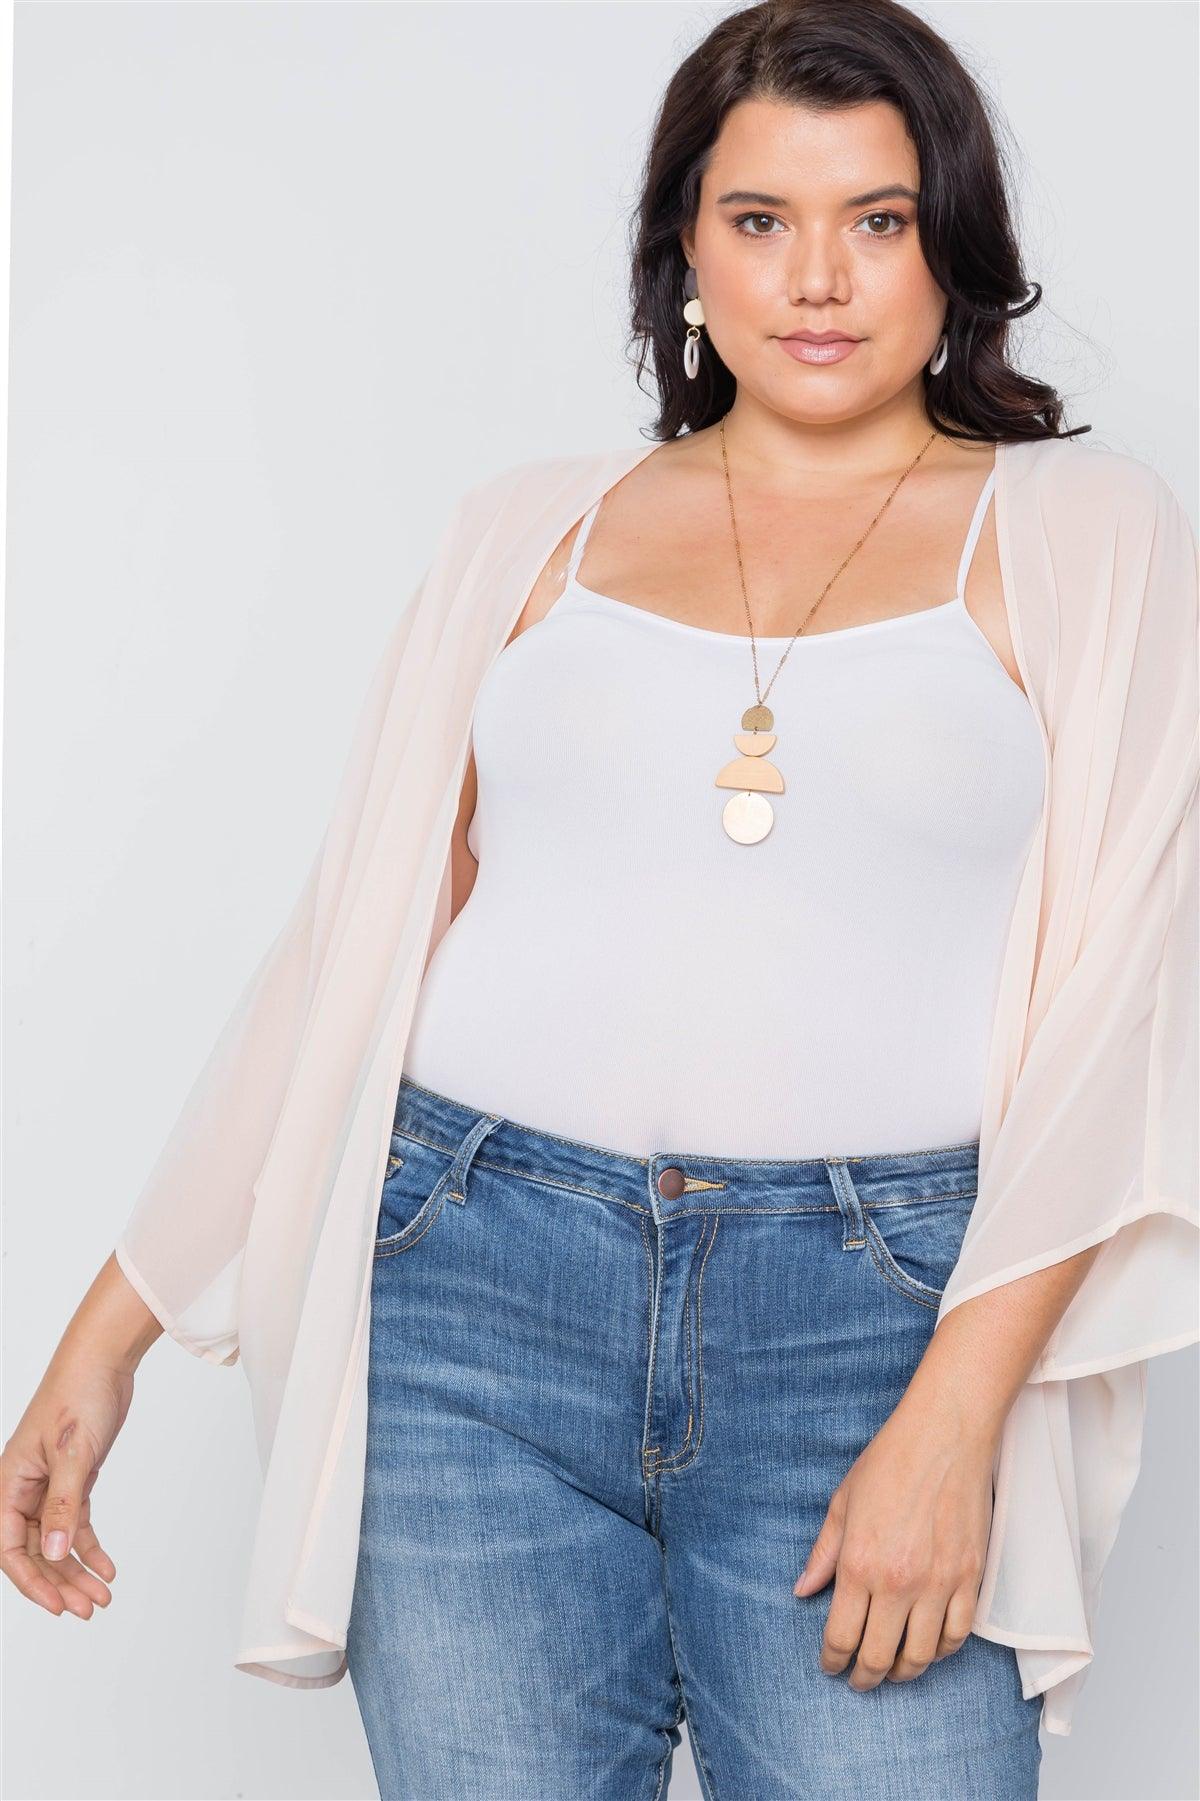 Plus Size Natural Sheer Batwing Sleeves Cover Up /3-3